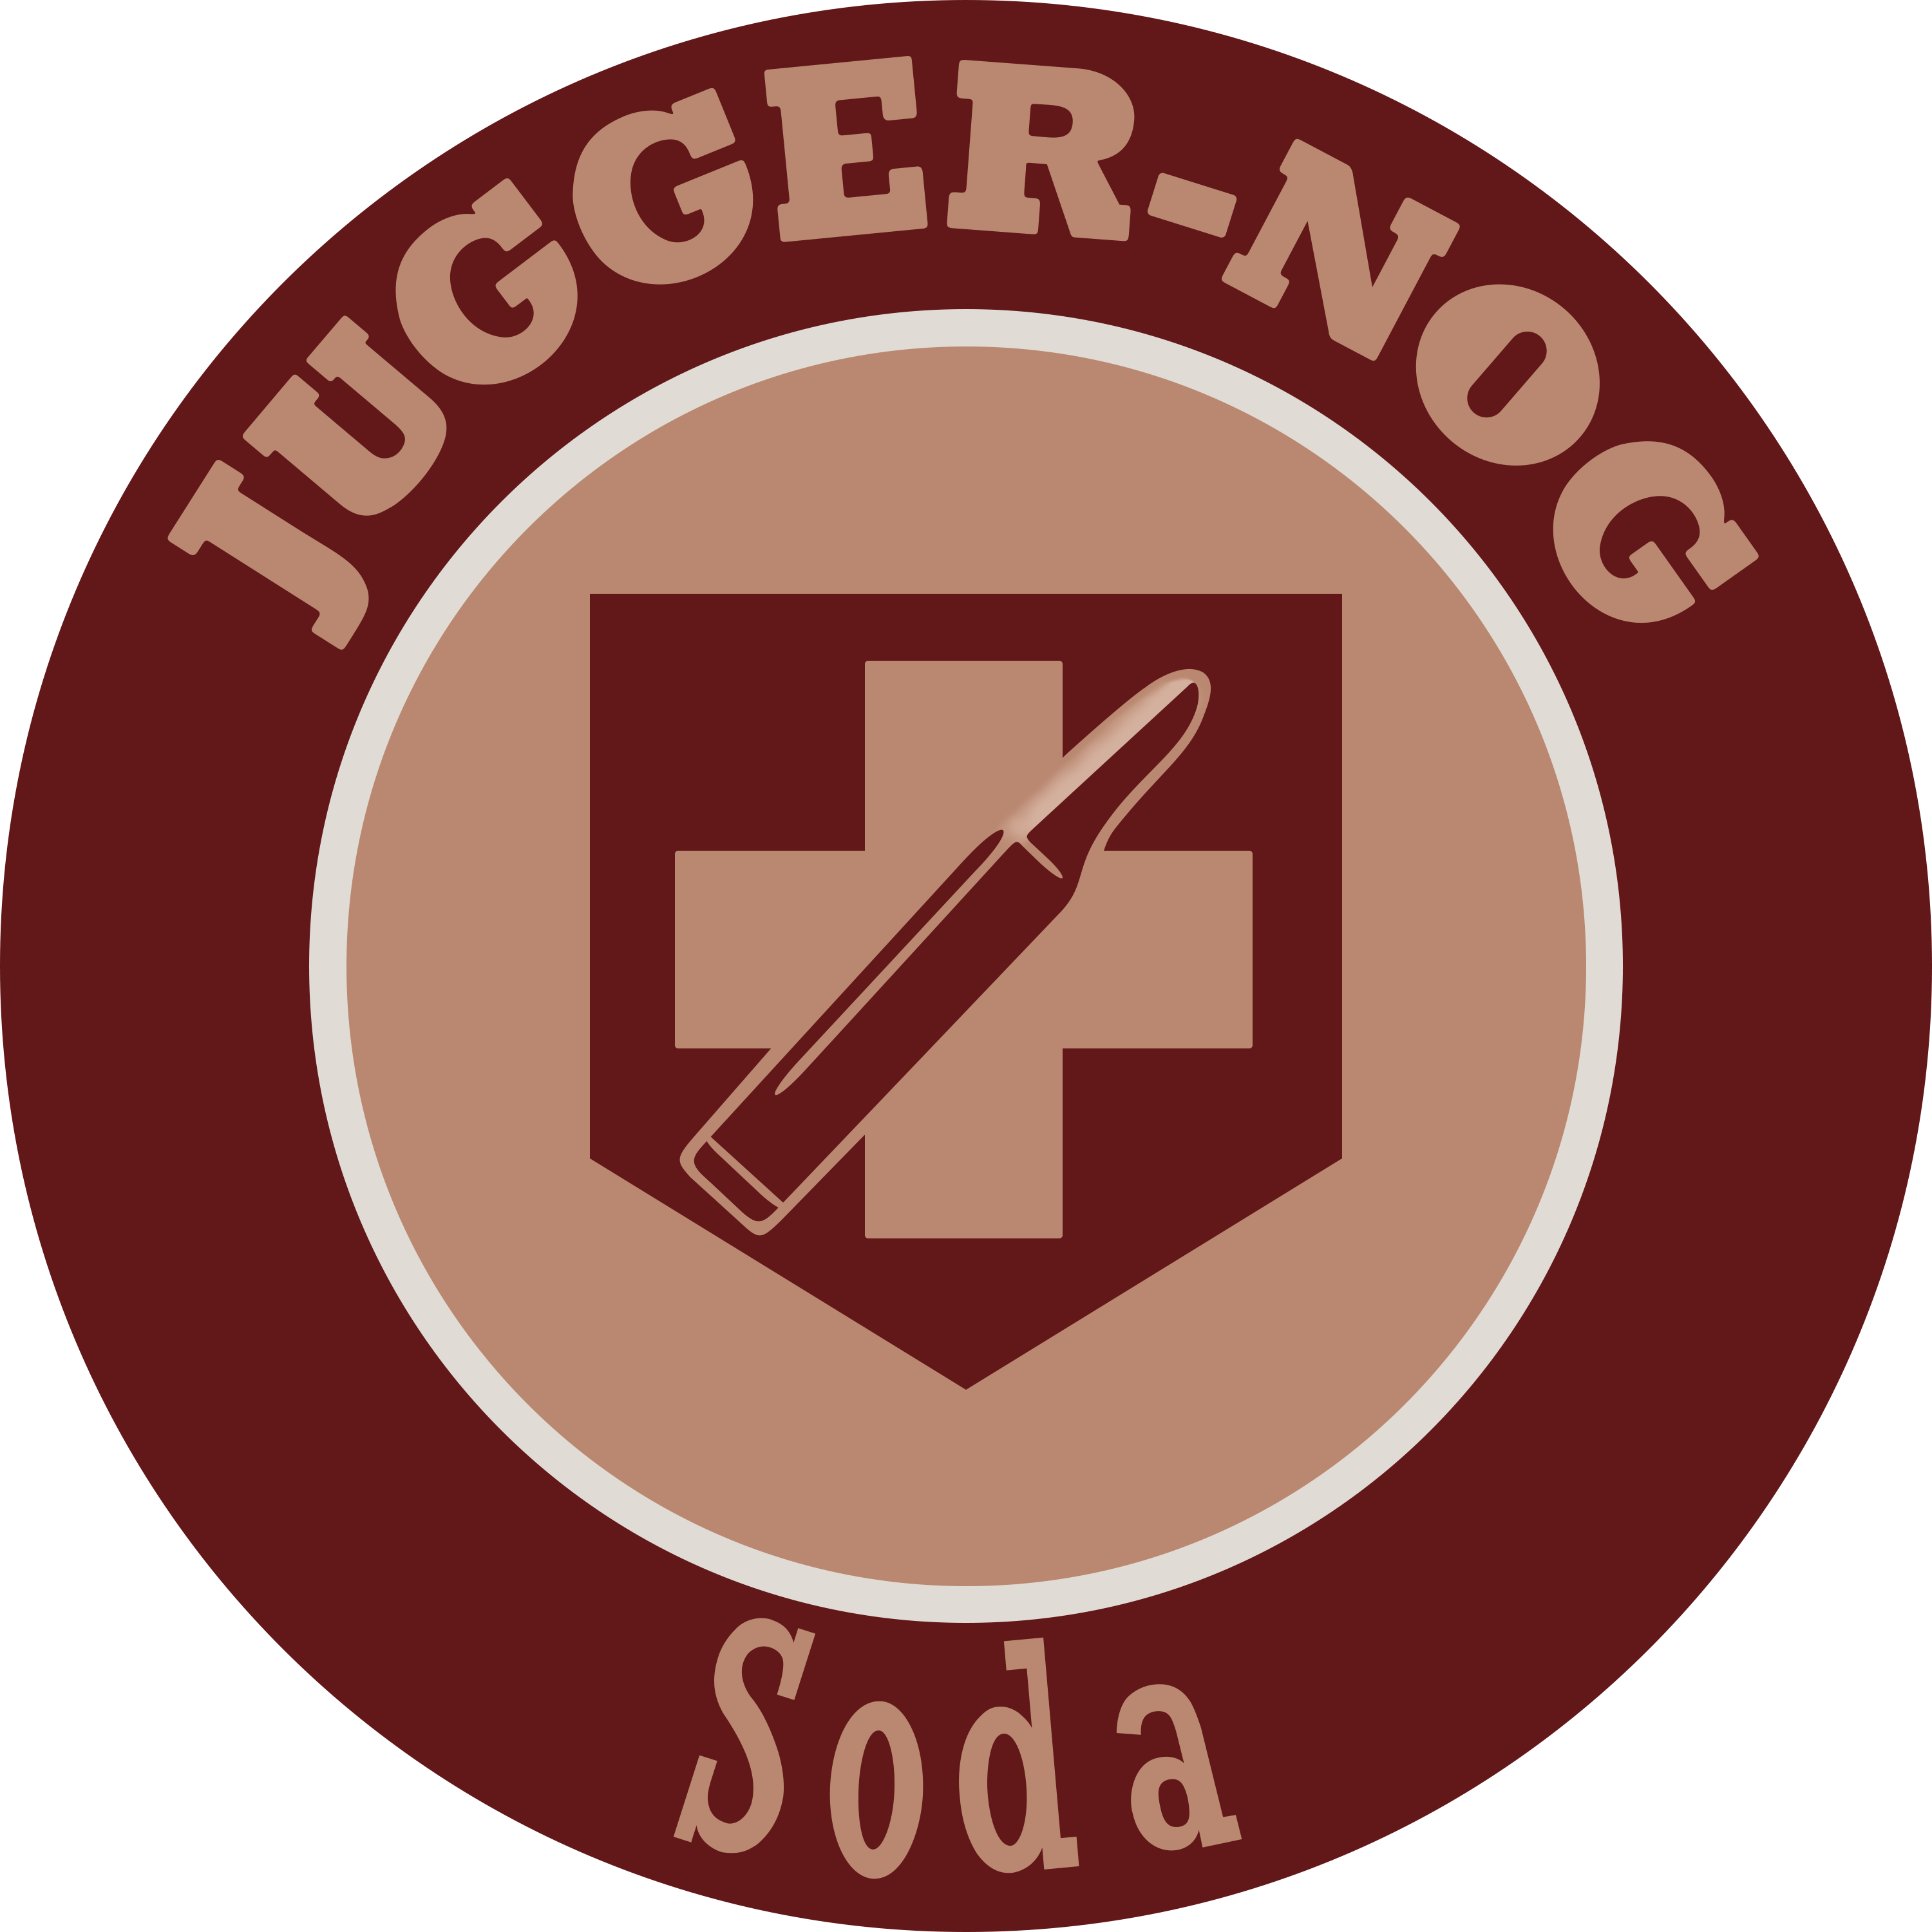 Juggernog Logo From Treyarch Zombies Would Be Nice Cod